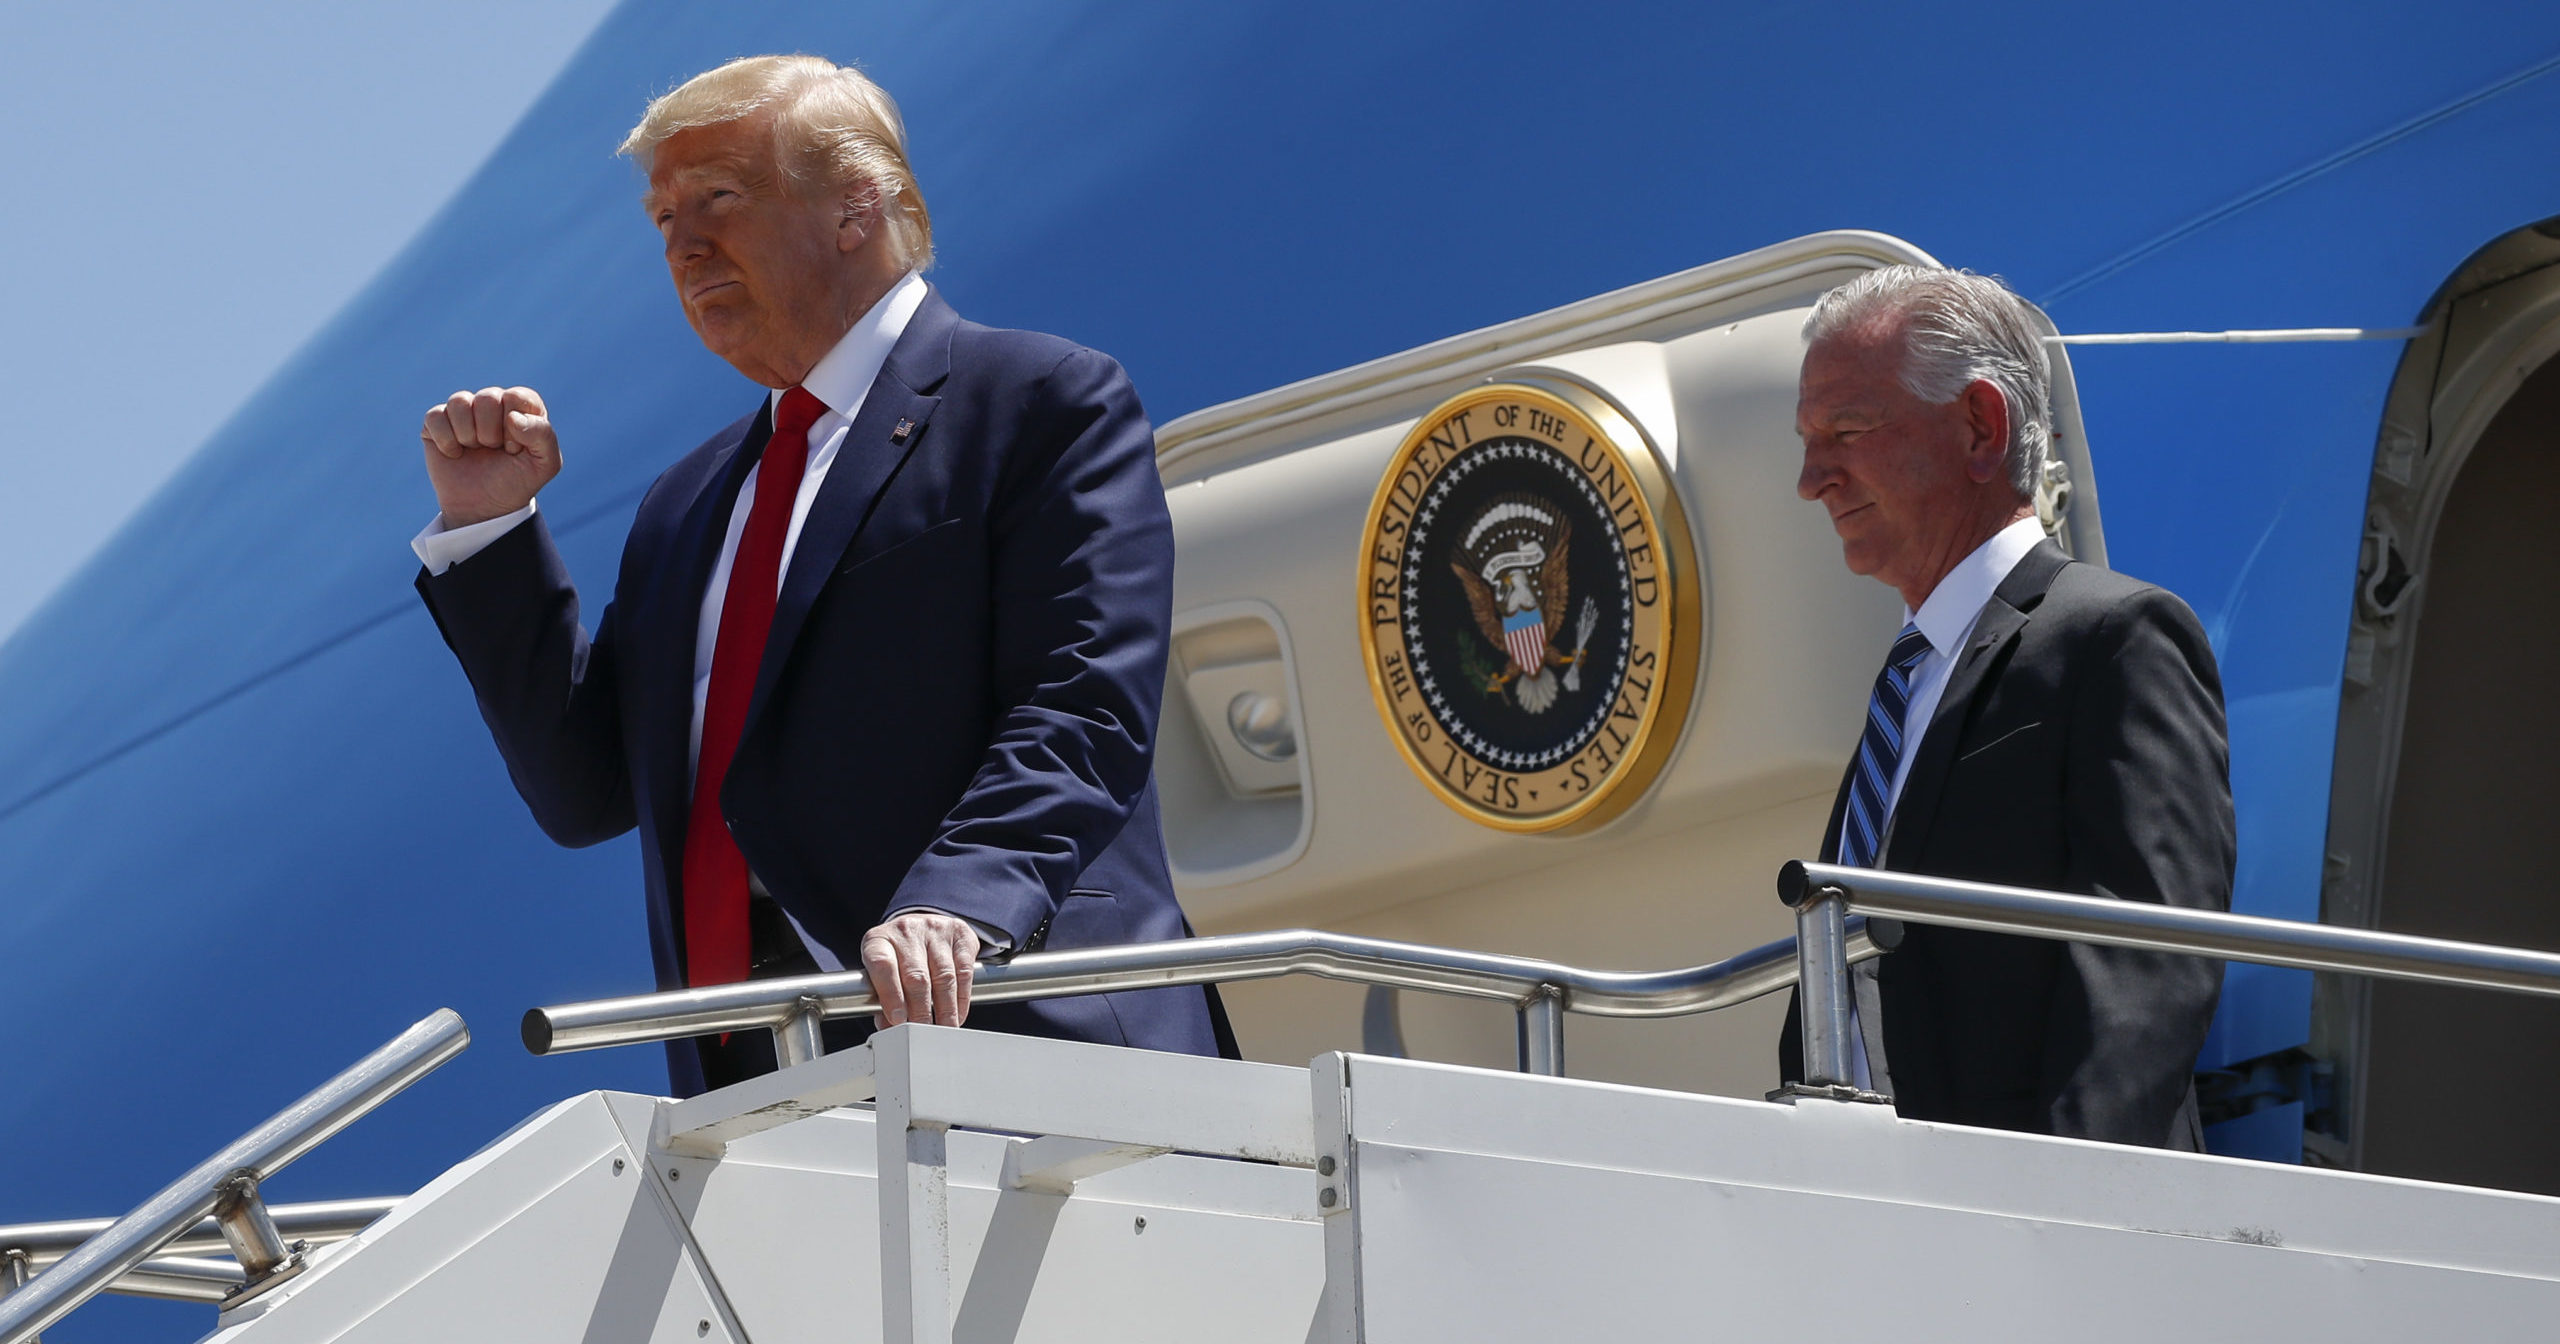 In this June 11, 2020, file photo, President Donald Trump gestures as he steps off Air Force One at Dallas Love Field in Dallas with Senate candidate Tommy Tuberville. Trump has endorsed Tuberville in the race against his former attorney general.